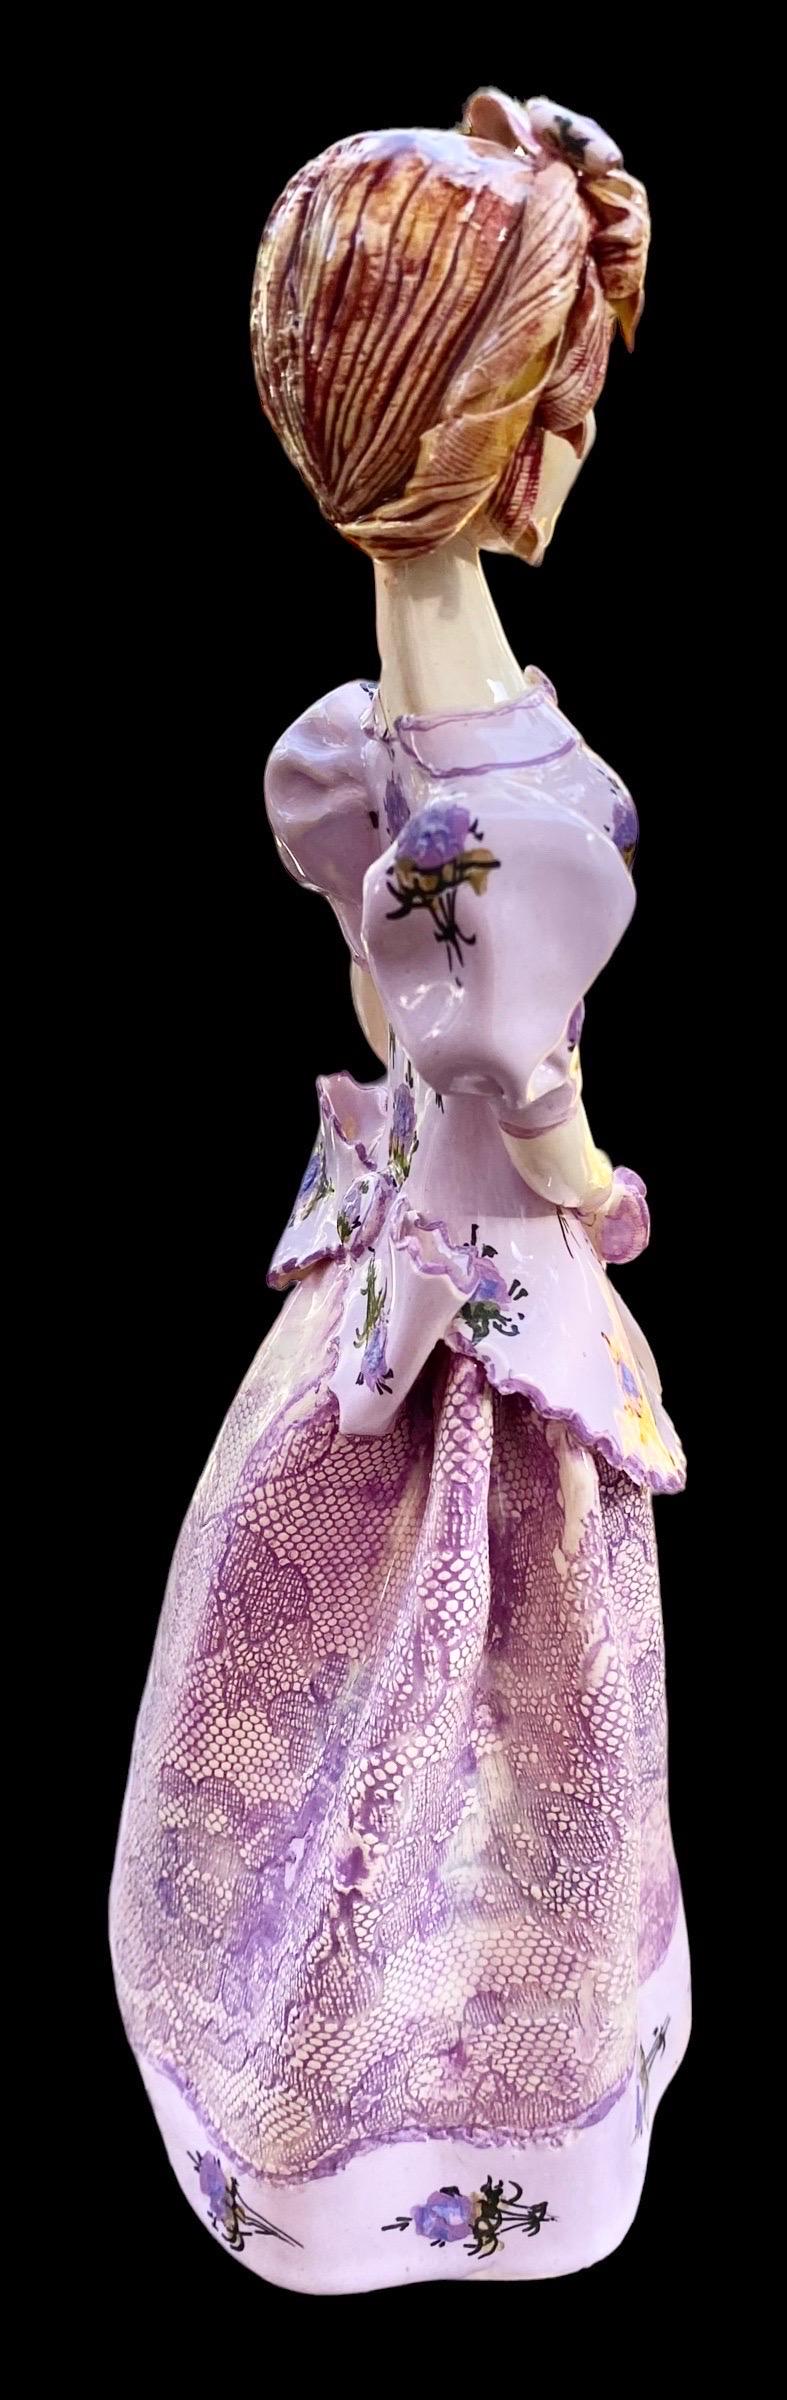 This is a lovely and delicate hand made clay art girl figurine in a lavender print dress with a lace overlay that stands 7